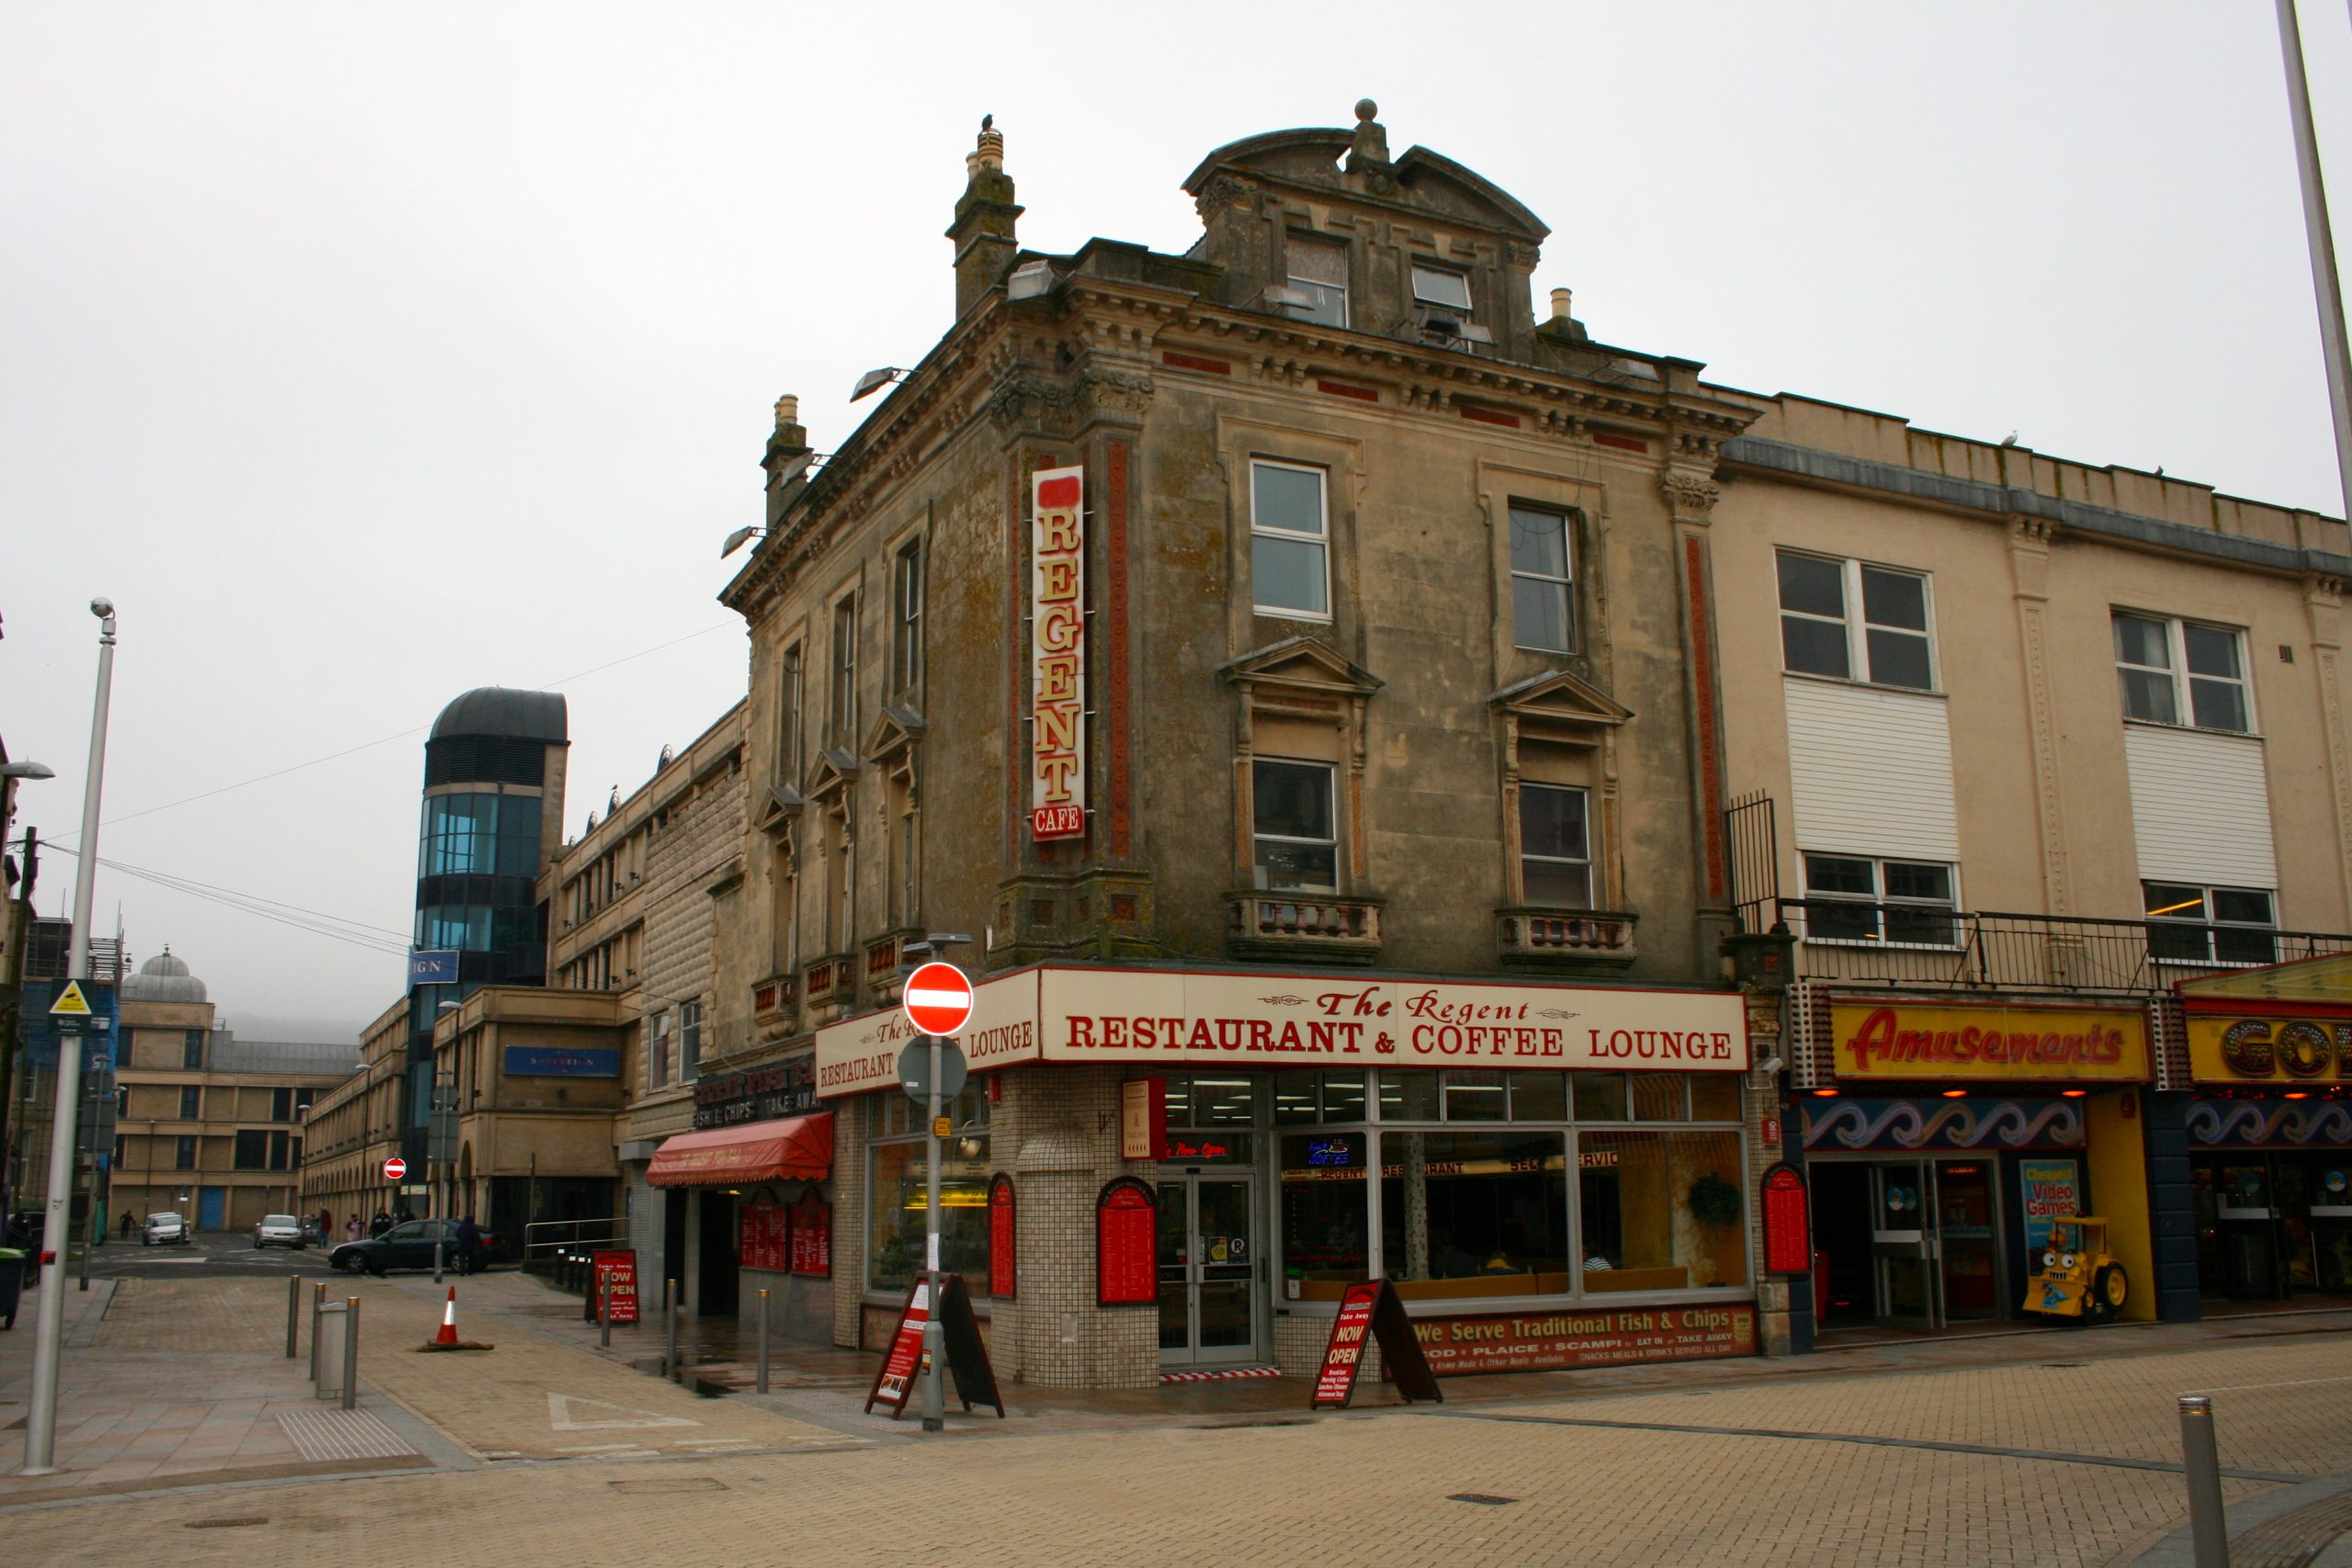 The Regent Restaurant and Coffee Lounge in Weston-super-Mare